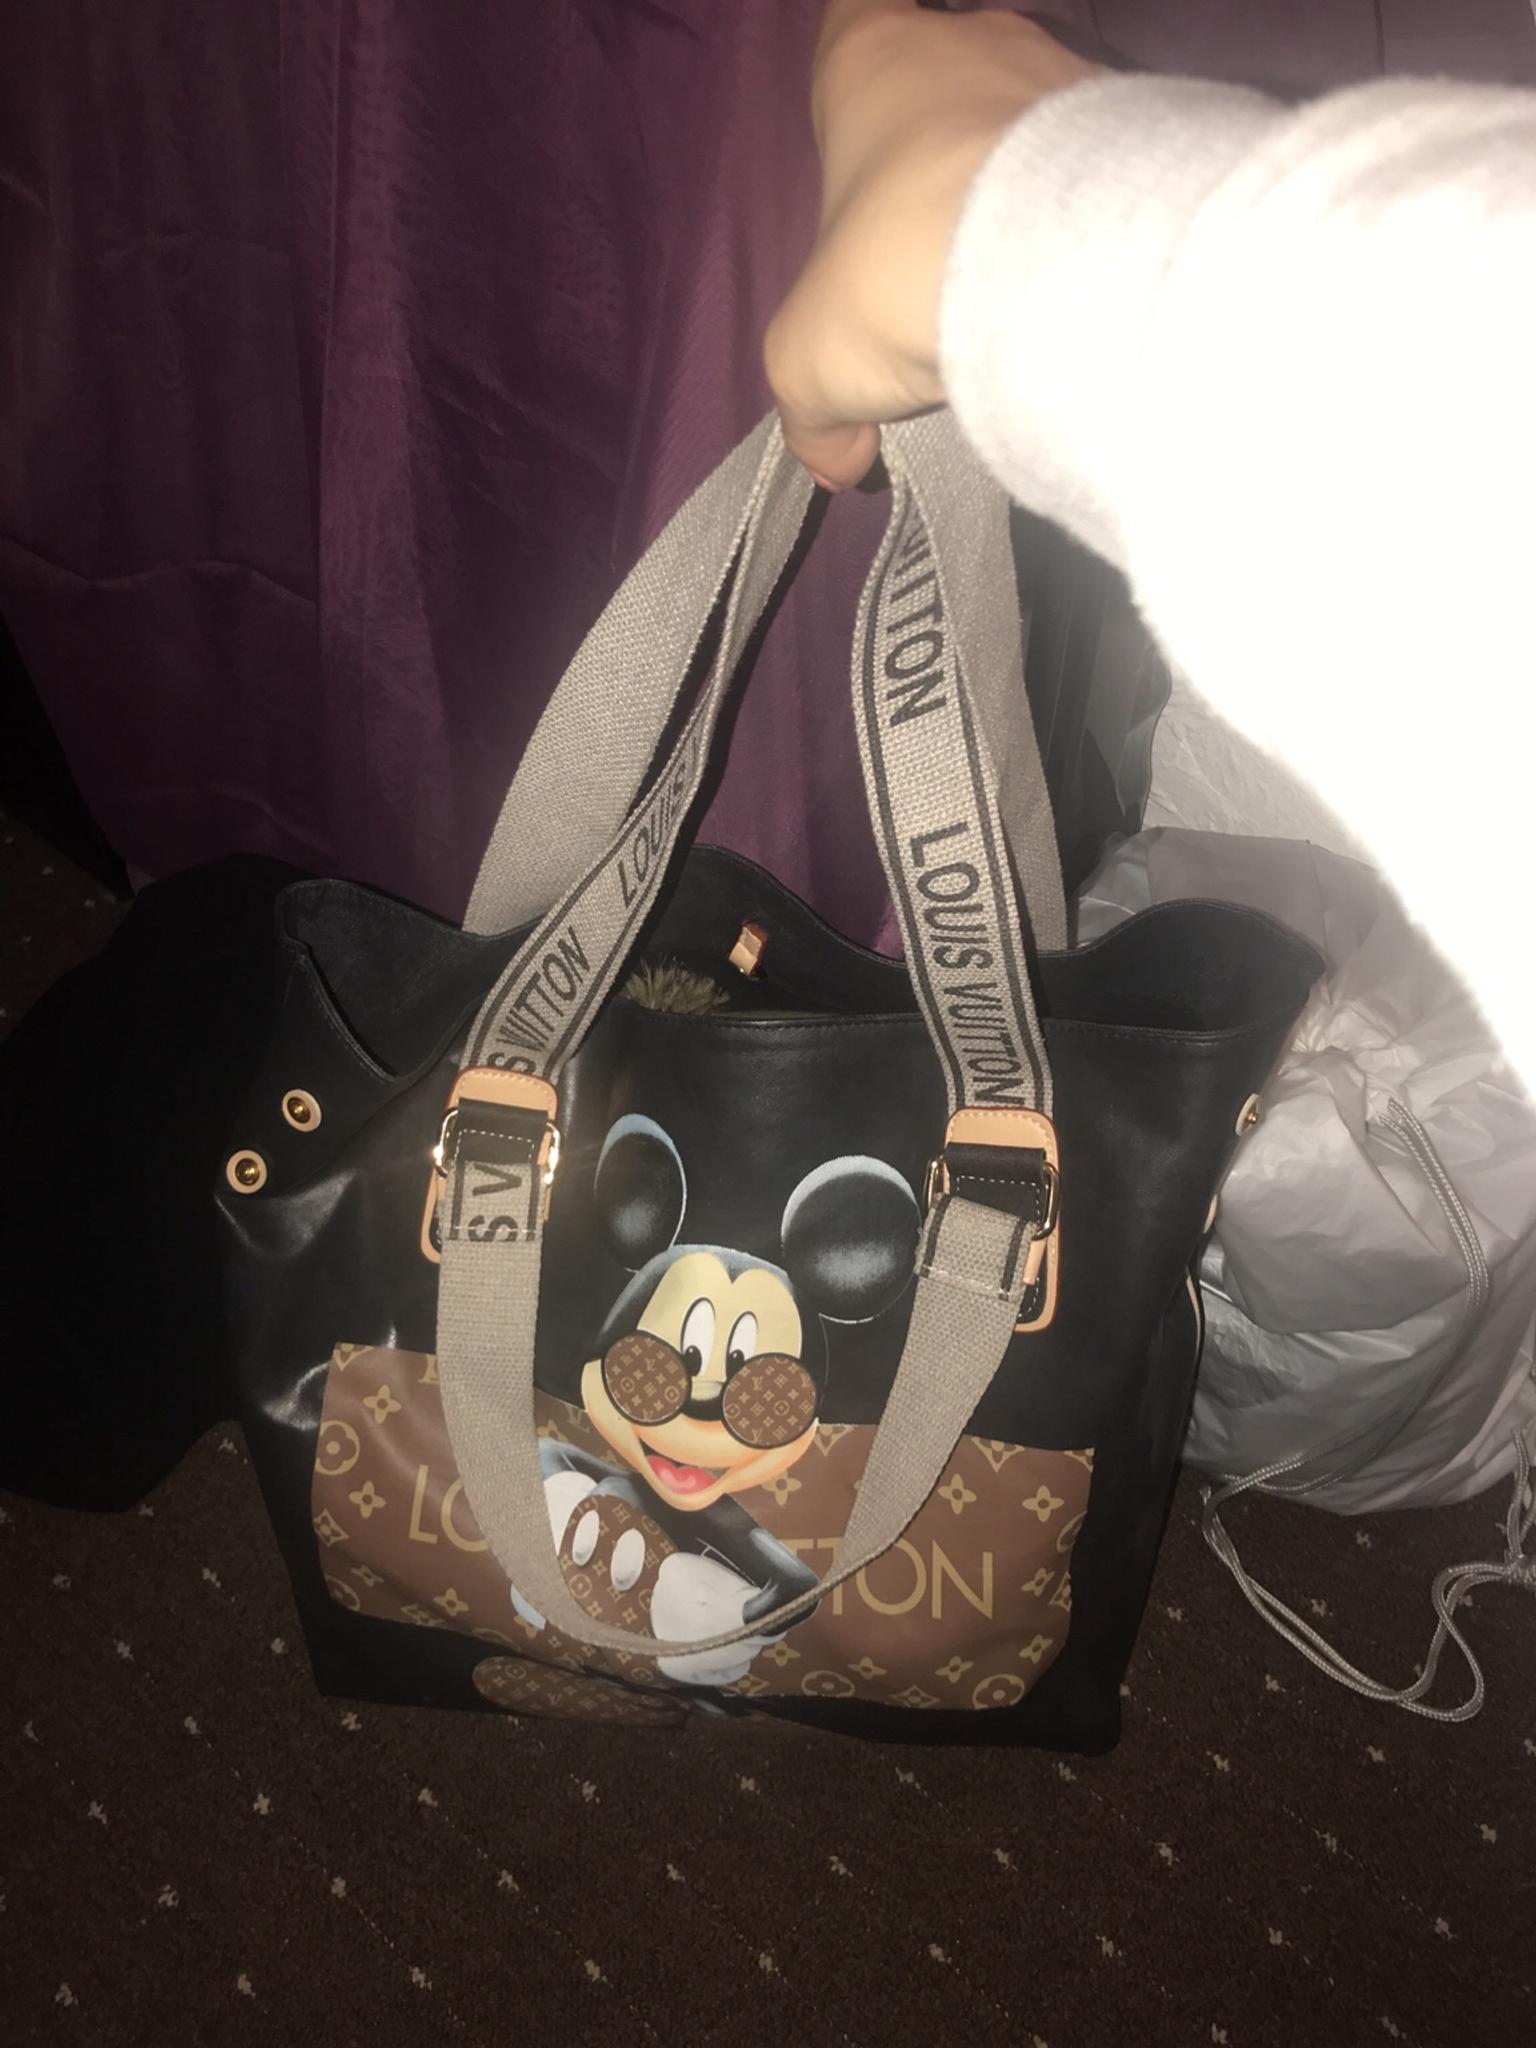 LOUIS VUITTON feat. DISNEY - Minnie Mouse in hoodie, Mickey mouse  pictures, Mickey mouse art, Minnie mouse pictures